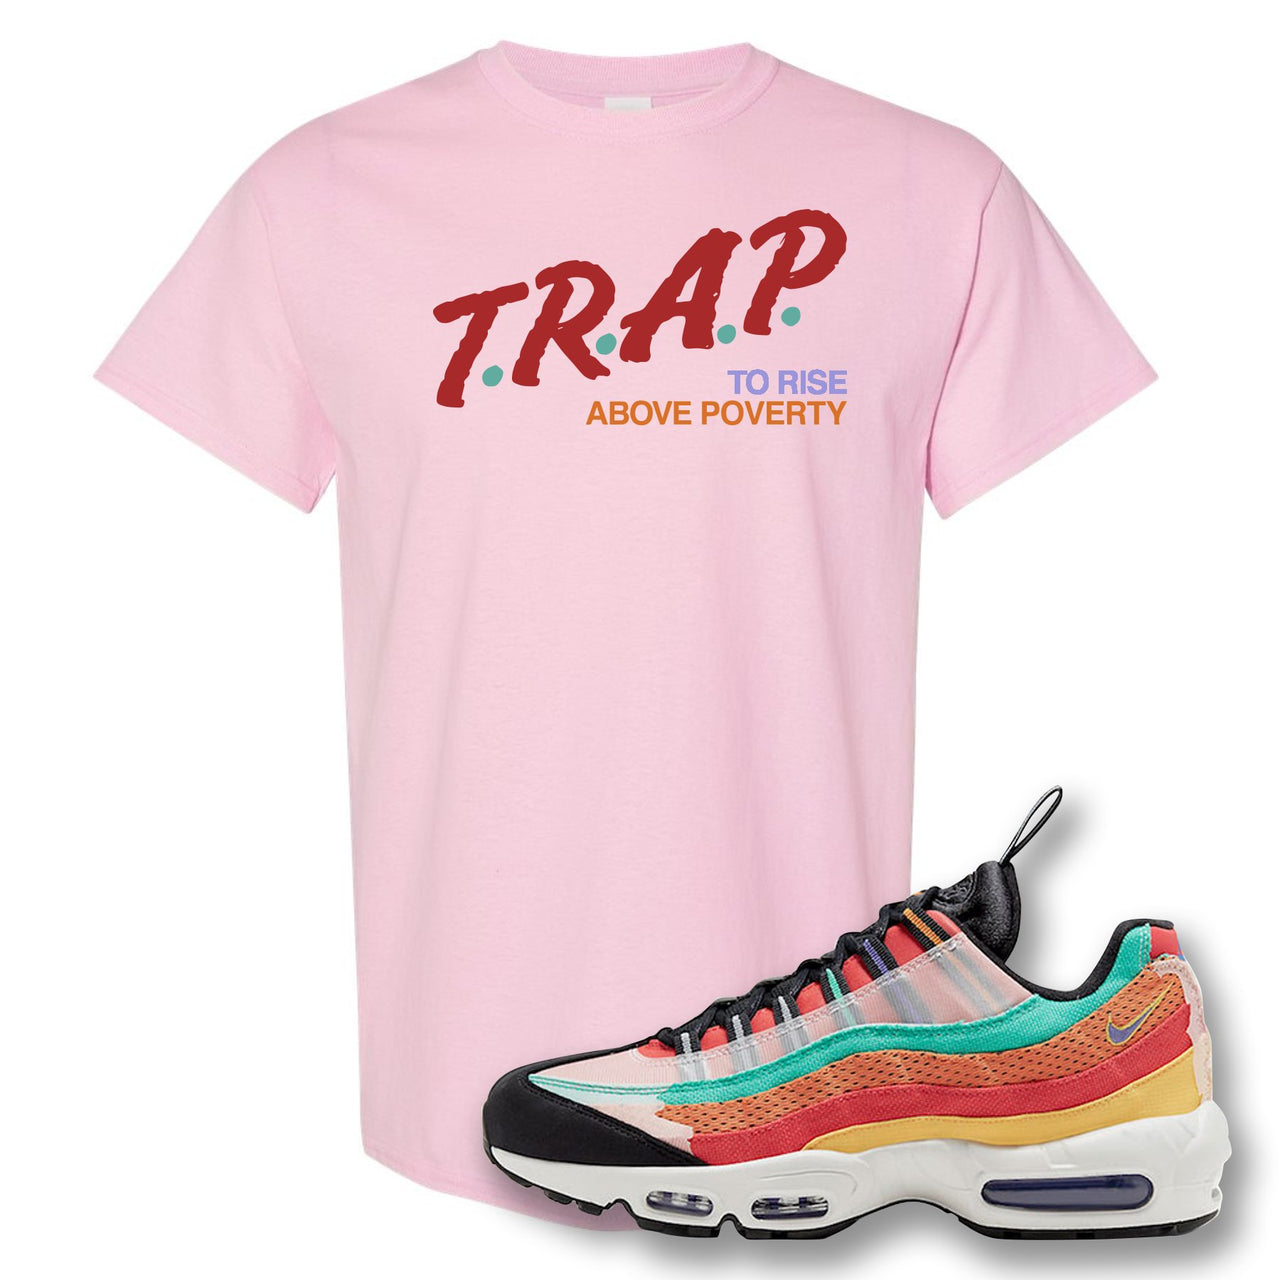 Air Max 95 Black History Month Sneaker Soft Pink T Shirt | Tees to match Nike Air Max 95 Black History Month Shoes | Trap To Rise Above Poverty